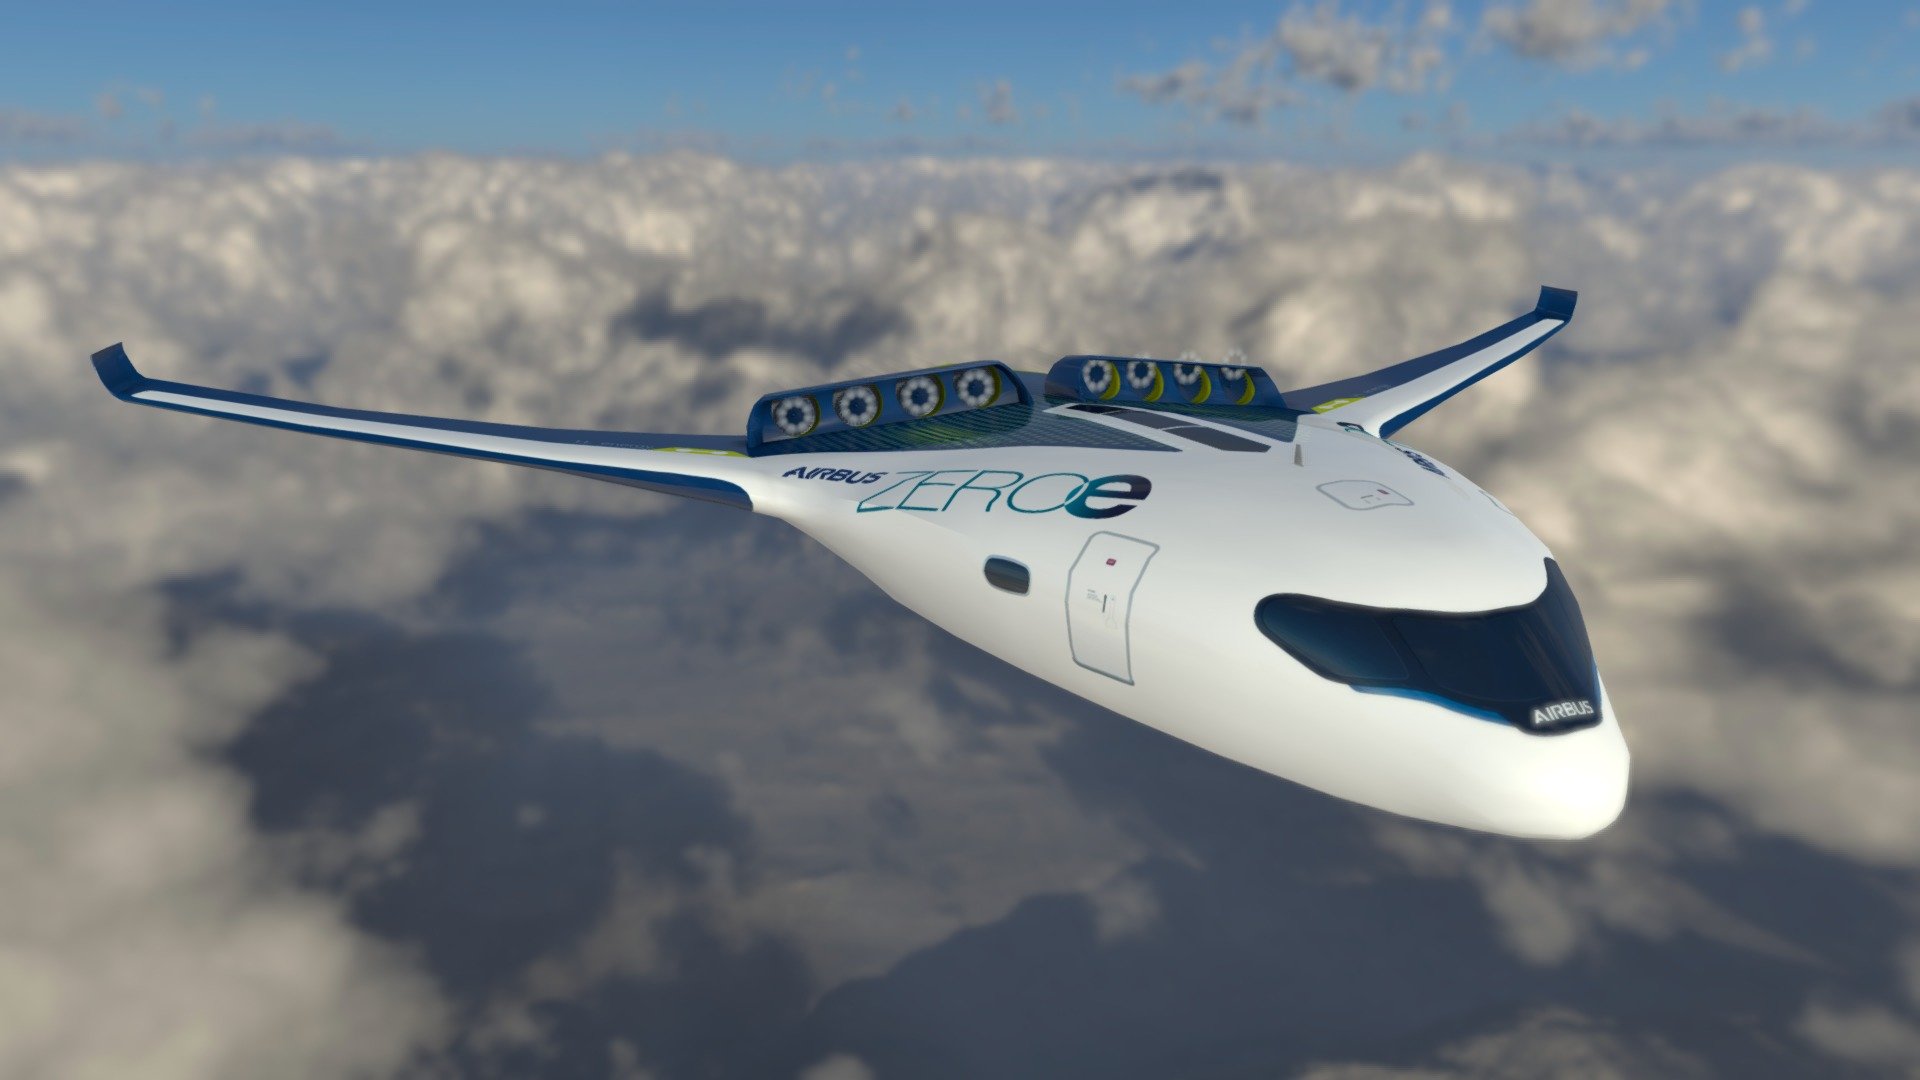 All three ZEROe concepts are hybrid-hydrogen aircraft. They are powered by hydrogen combustion through modified gas turbine engines. Liquid hydrogen is used as fuel for combustion with oxygen.

In addition, hydrogen fuel cells create electrical power that complements the gas turbine, resulting in a highly efficient hybrid-electric propulsion system. All of these technologies are complementary, and the benefits are additive.

In 2022, we launched our ZEROe demonstrator with the aim to test hydrogen combustion technology on an A380 multimodal platform. Through future ground and flight testing, we expect to achieve a mature technology readiness level for a hydrogen-combustion propulsion system by 2025 3d model